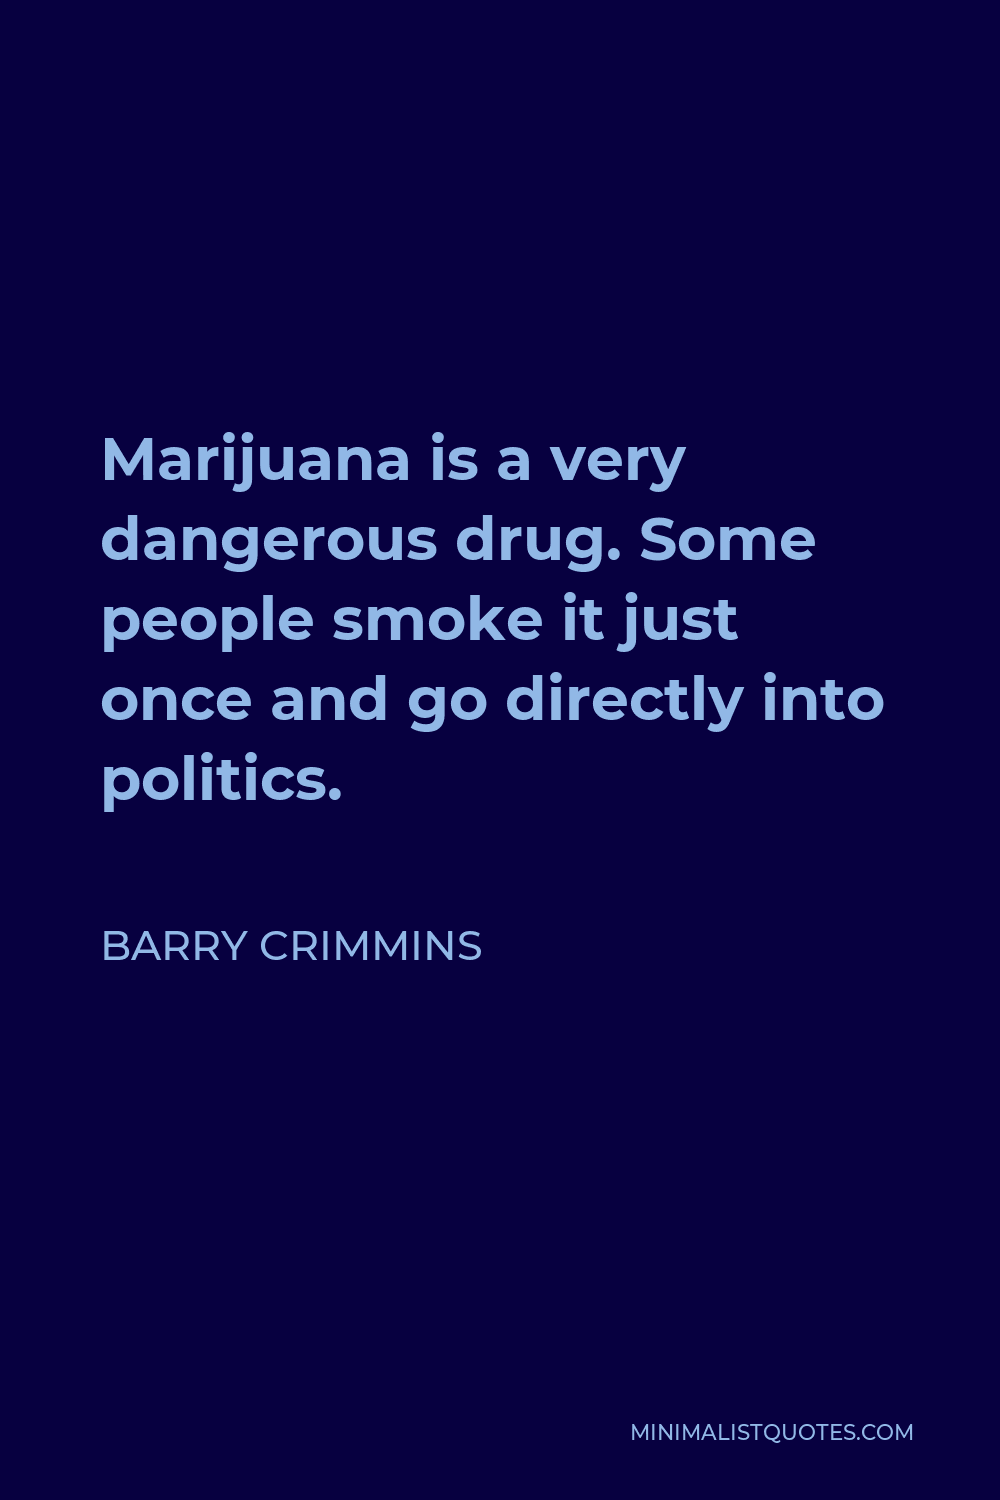 Barry Crimmins Quote - Marijuana is a very dangerous drug. Some people smoke it just once and go directly into politics.